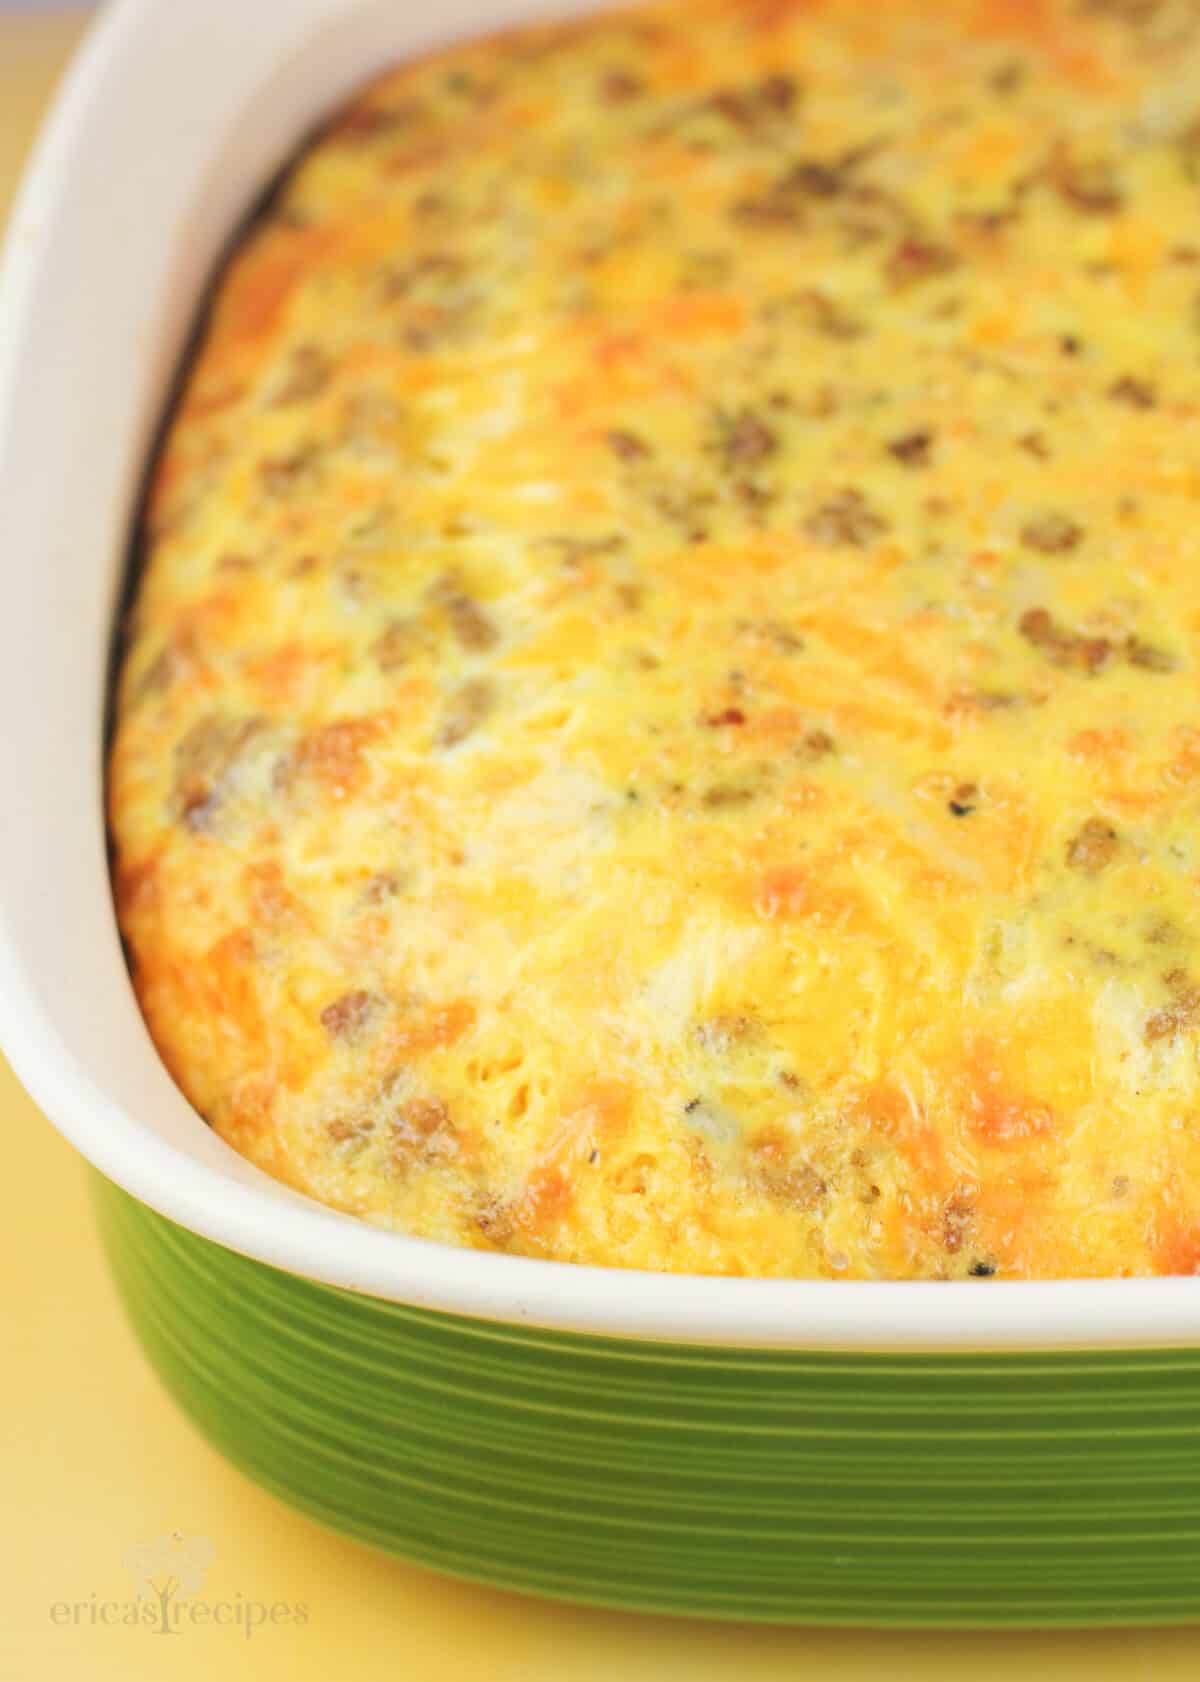 baked casserole in green dish